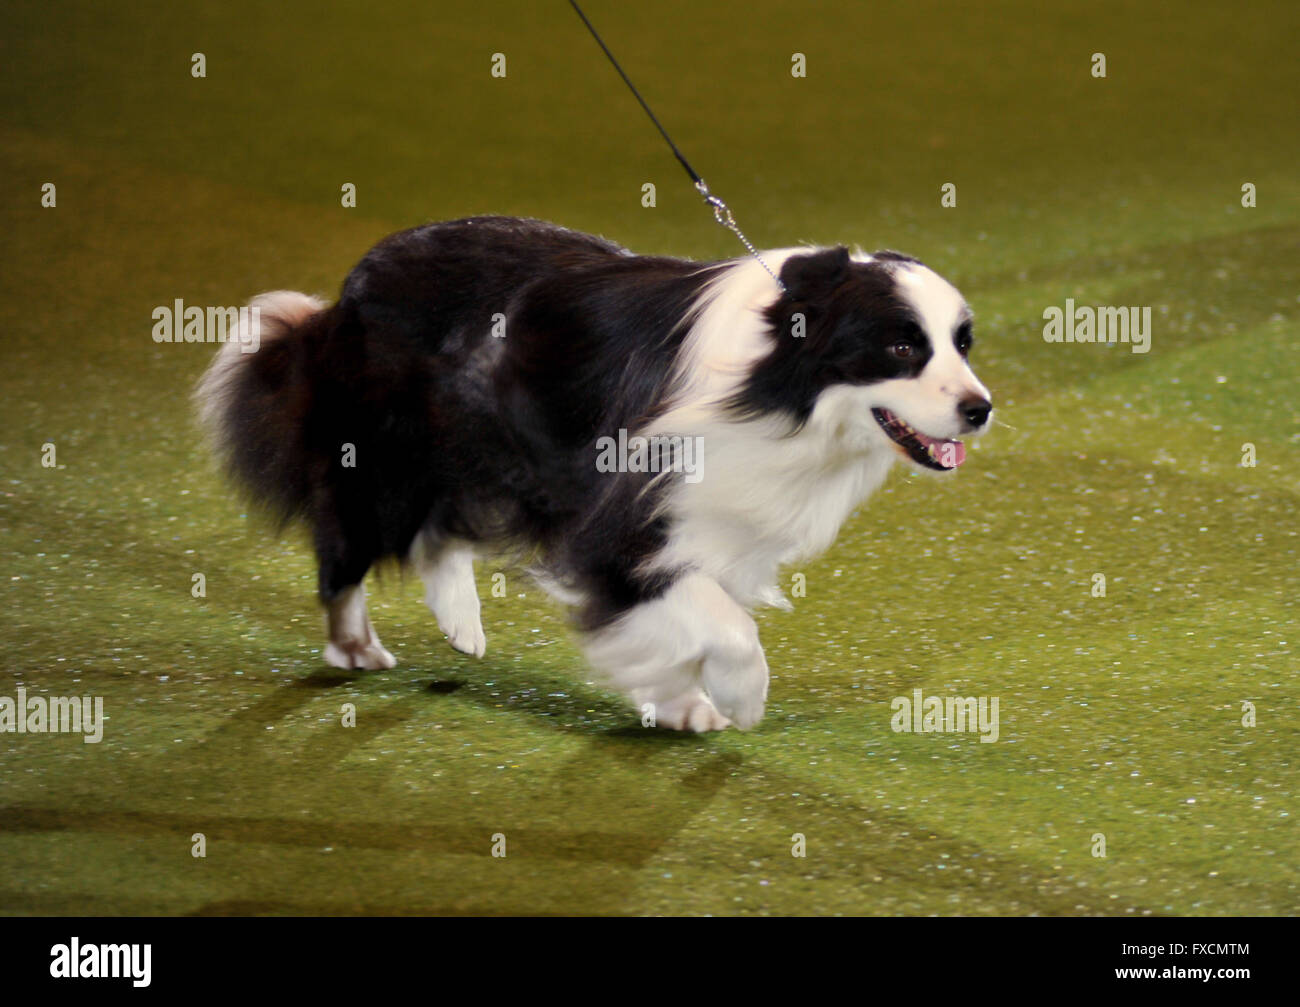 Crufts 2016 at NEC Birmingham - Day 4 - Best in Show Presentation  Featuring: GER/INT/AUST CH SIMARO COLD AS ICE WW, Border Collie, Dog, Owner: MRS S ADELSPERGER Where: Birmingham, United Kingdom When: 13 Mar 2016 Stock Photo